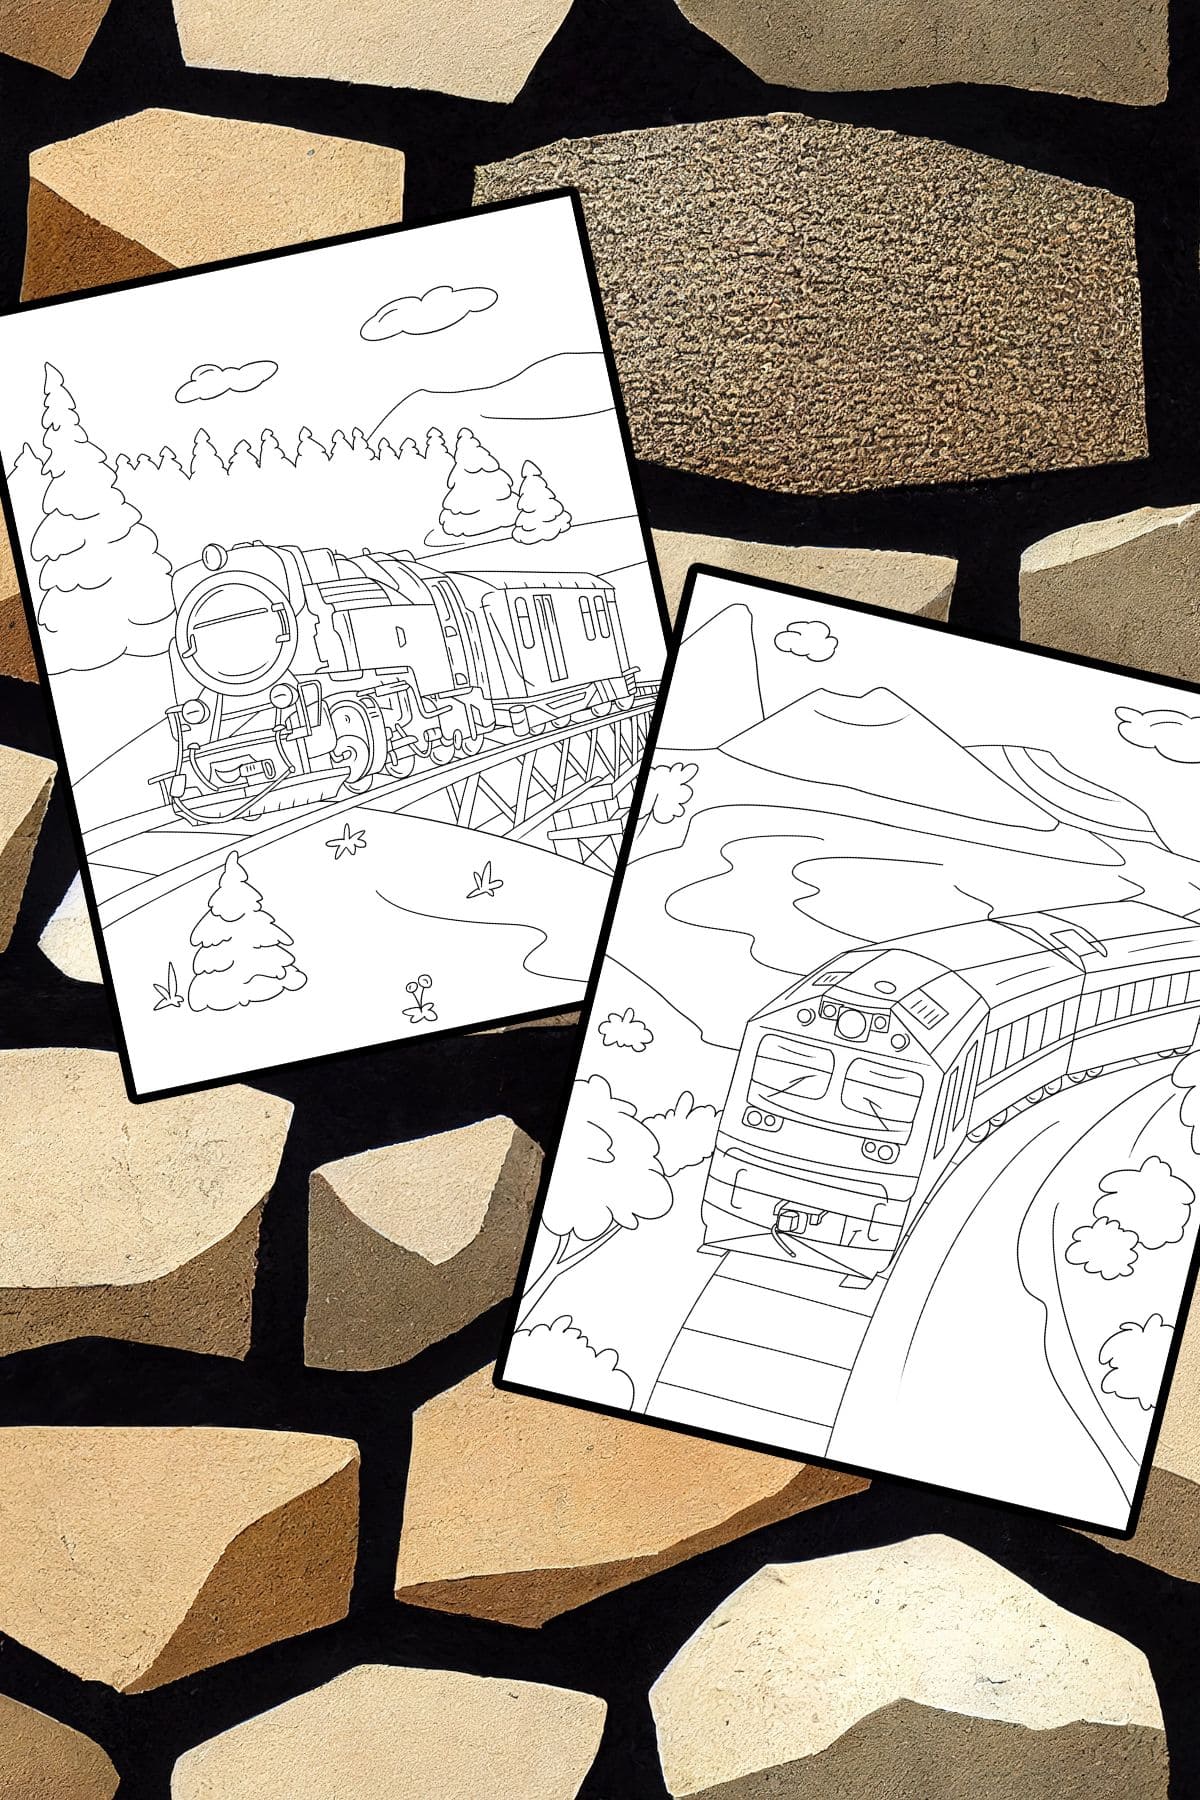 Free printable train coloring pages for kids adults